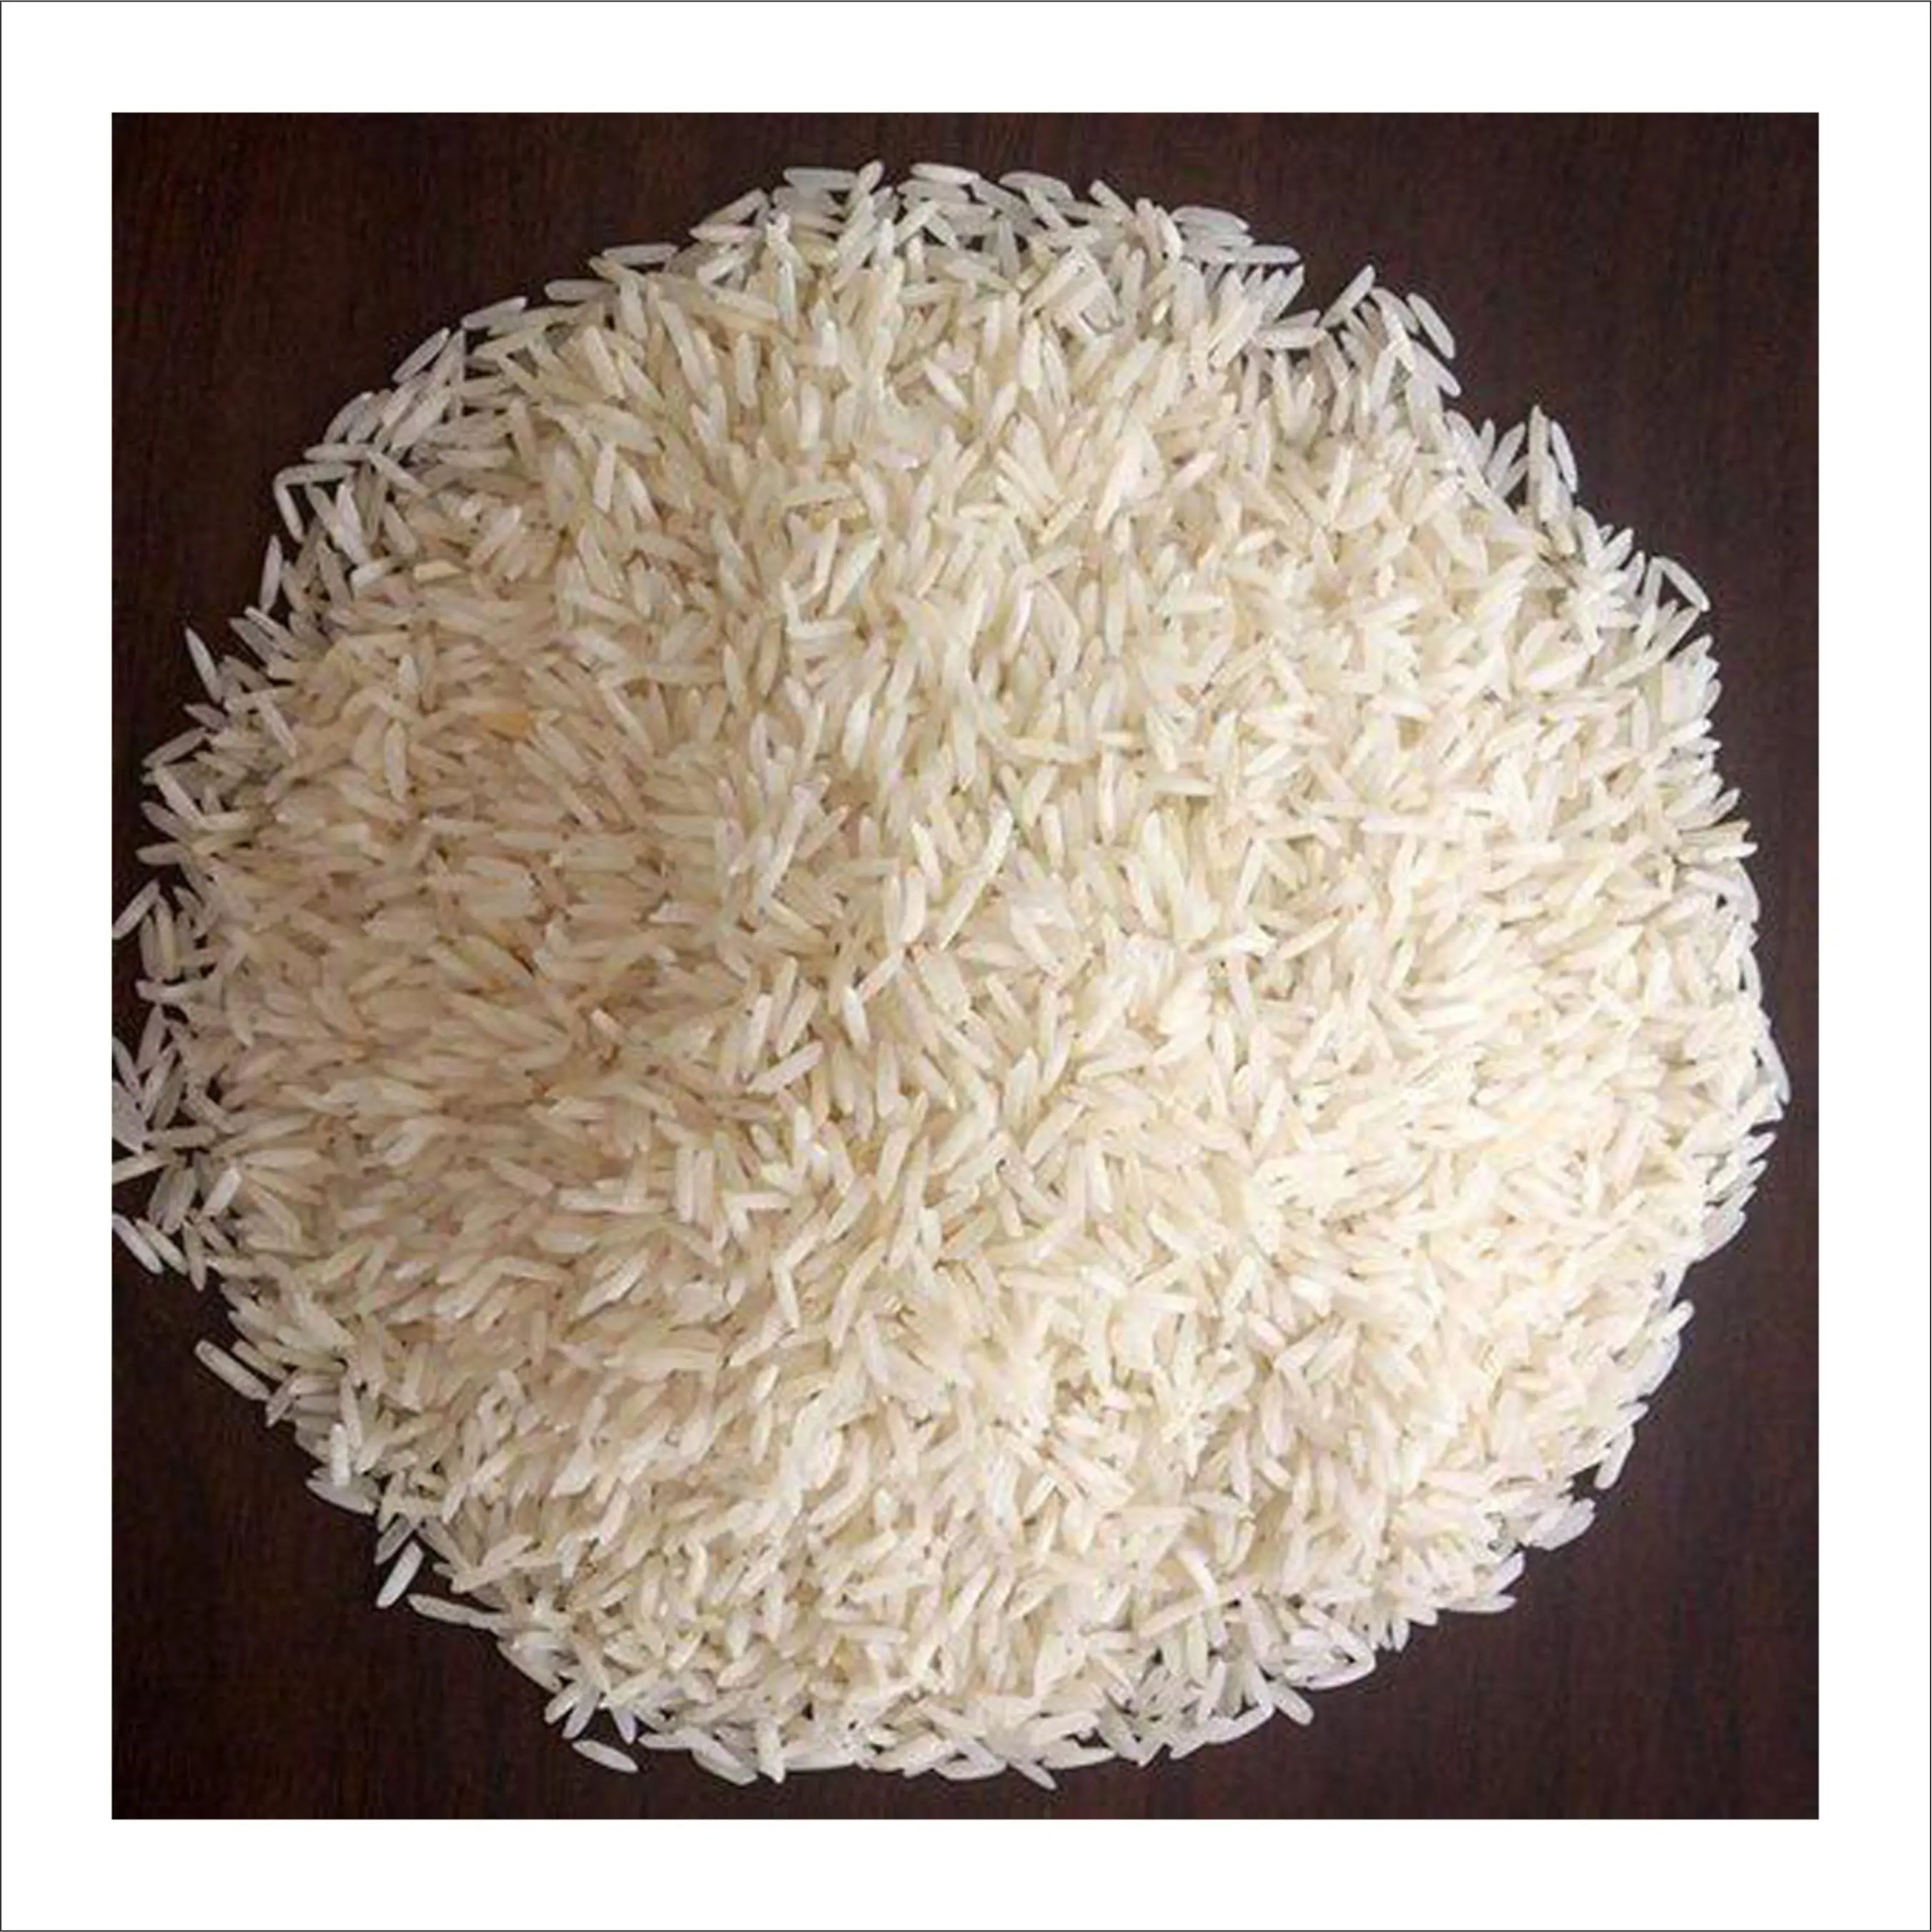 Wholesale Best Quality Basmati White Rice Origin Thailand 25kg For Sale In Cheap Price